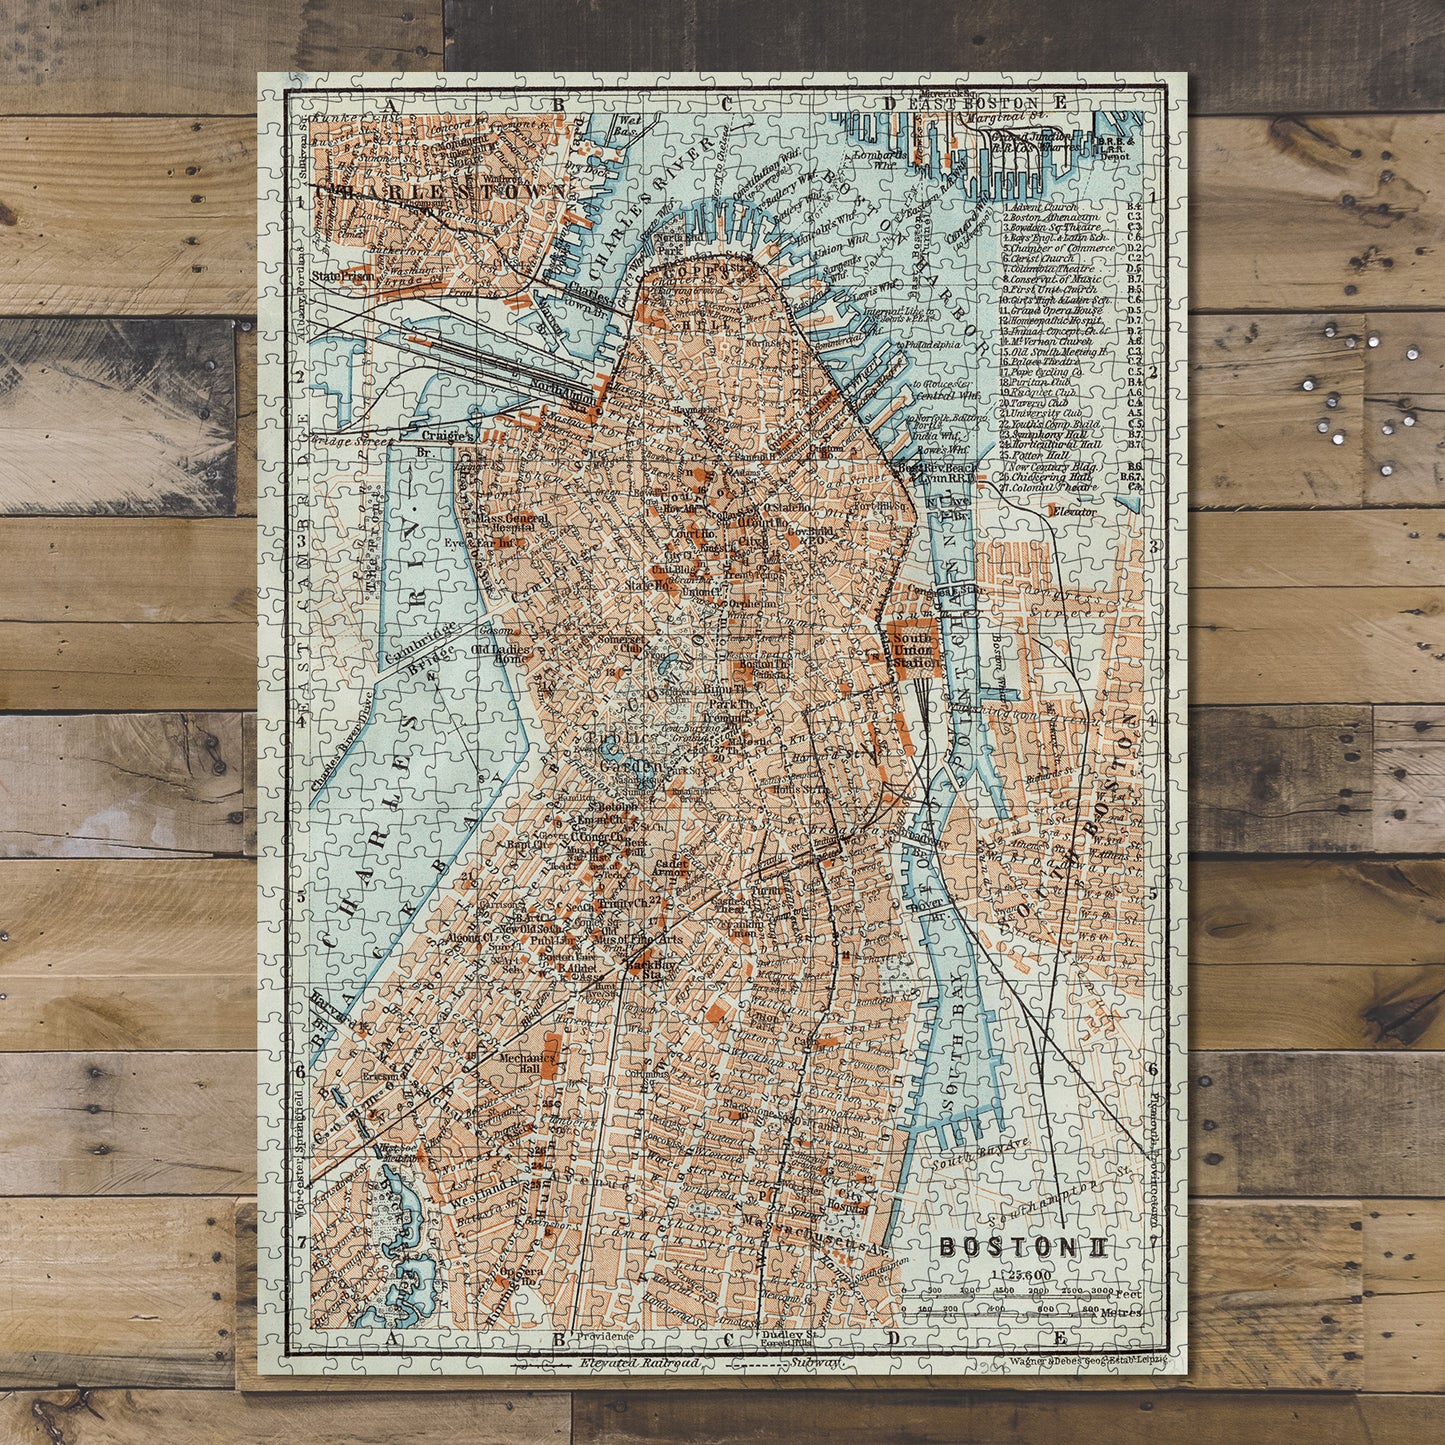 1000 Piece Jigsaw Puzzle 1906 Map | Boston II Oriented with north towards the up